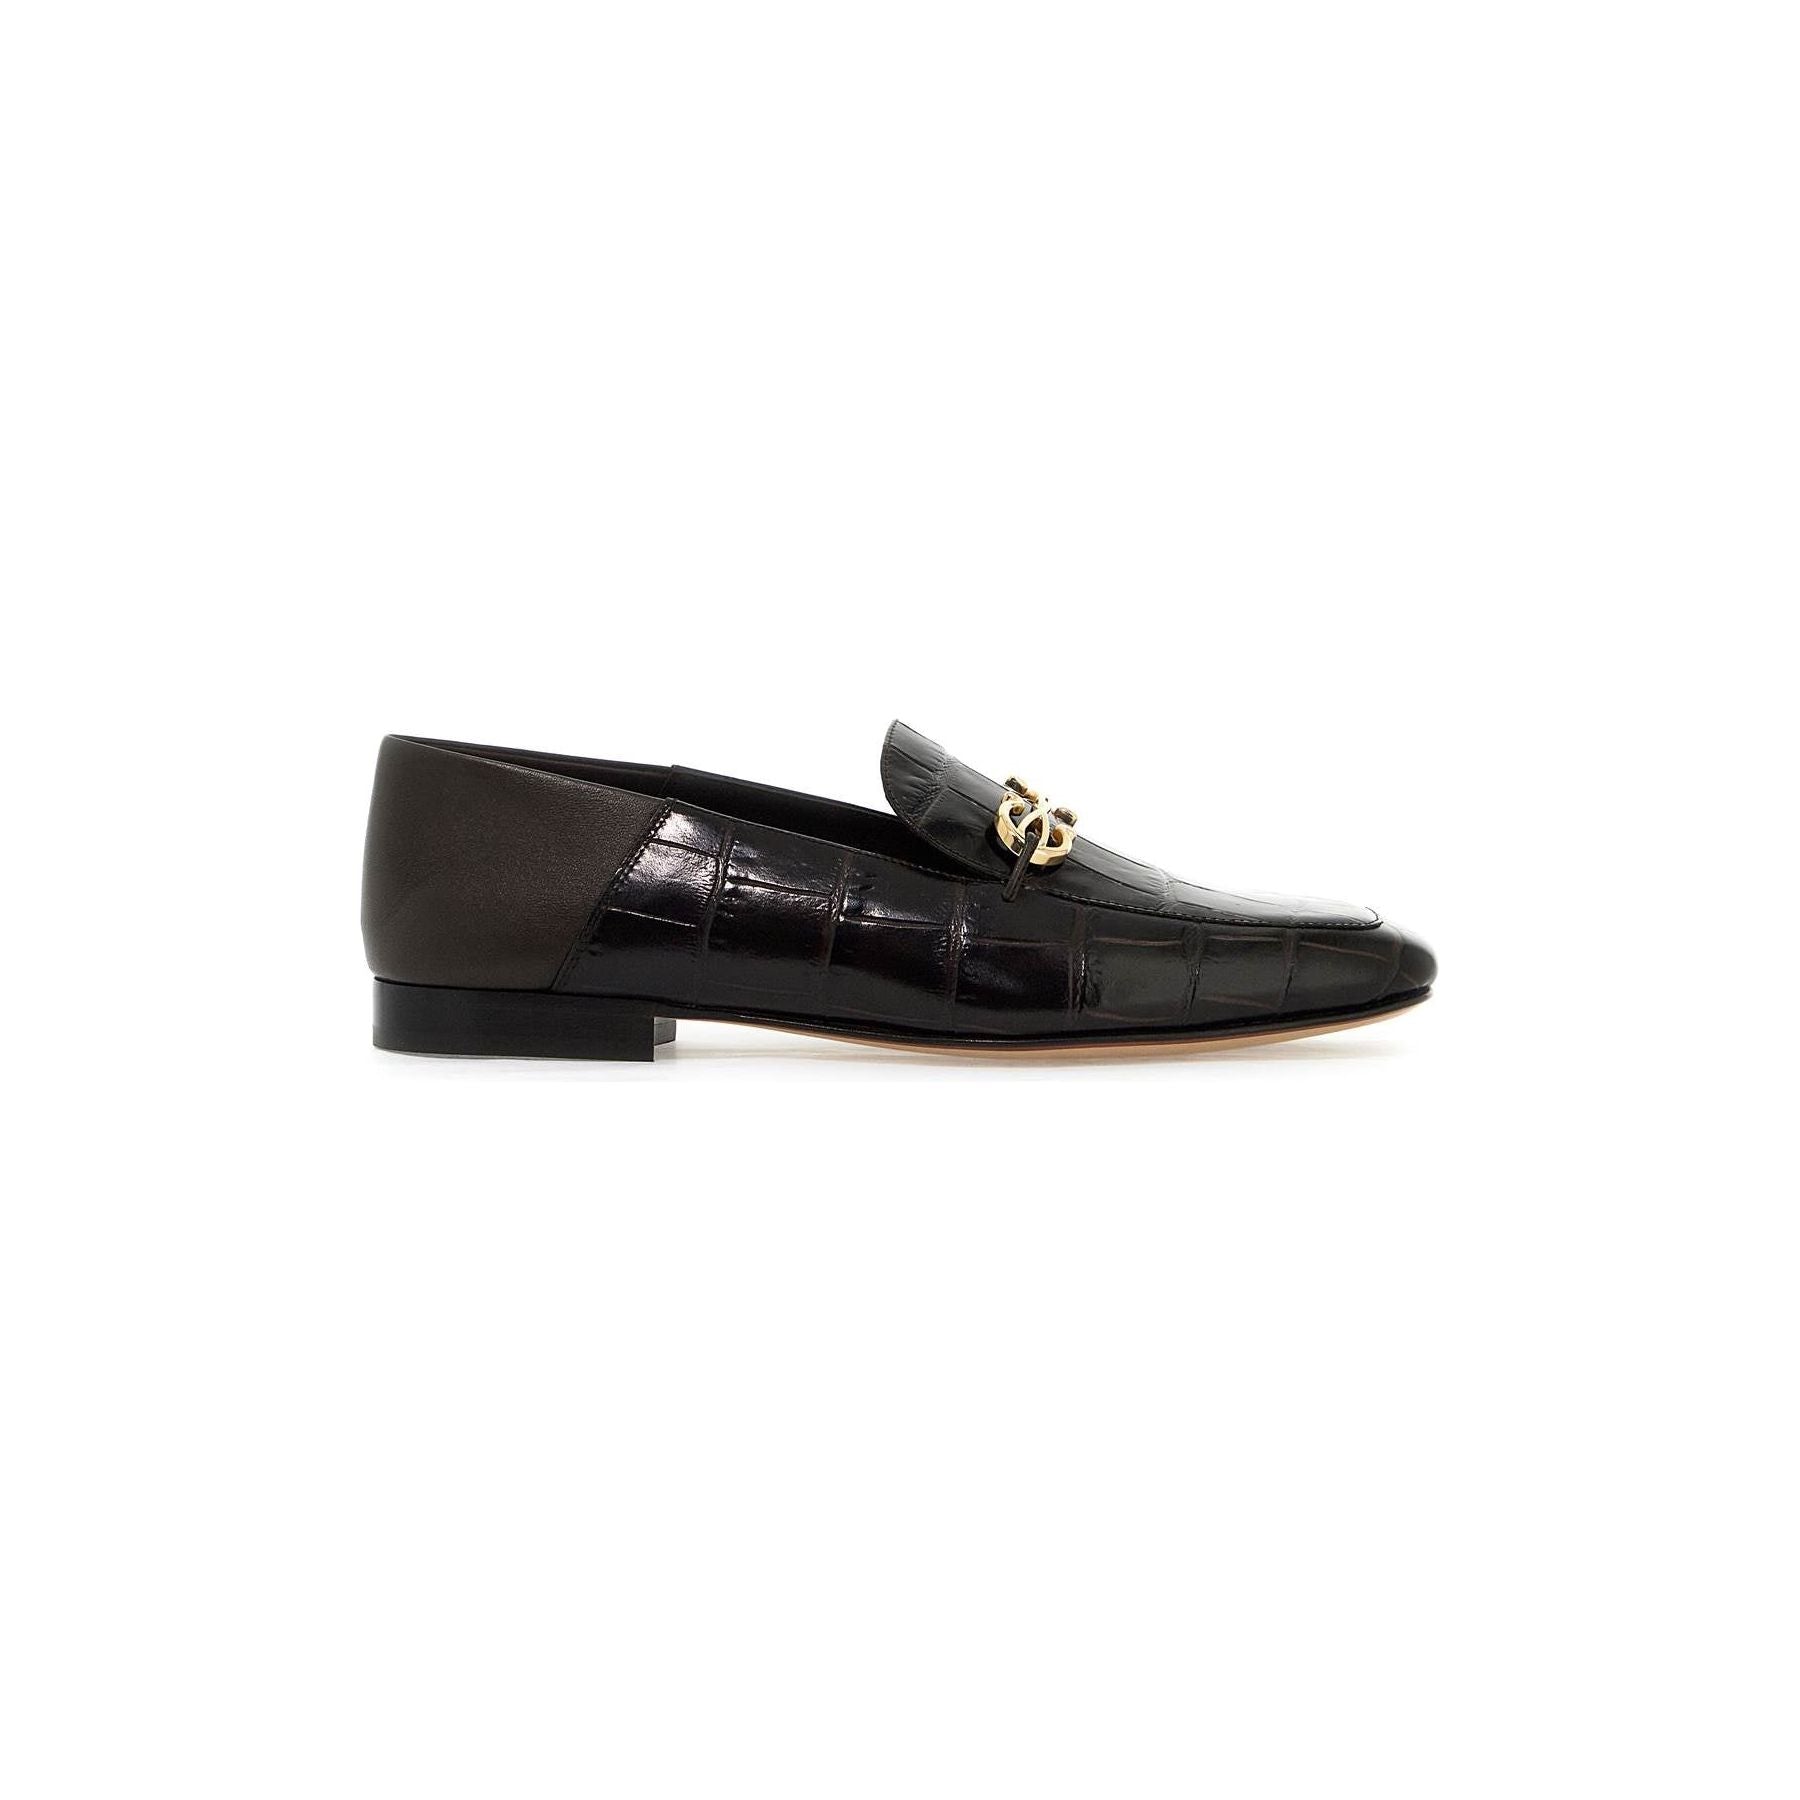 Louis Croc-Embossed Leather Loafers